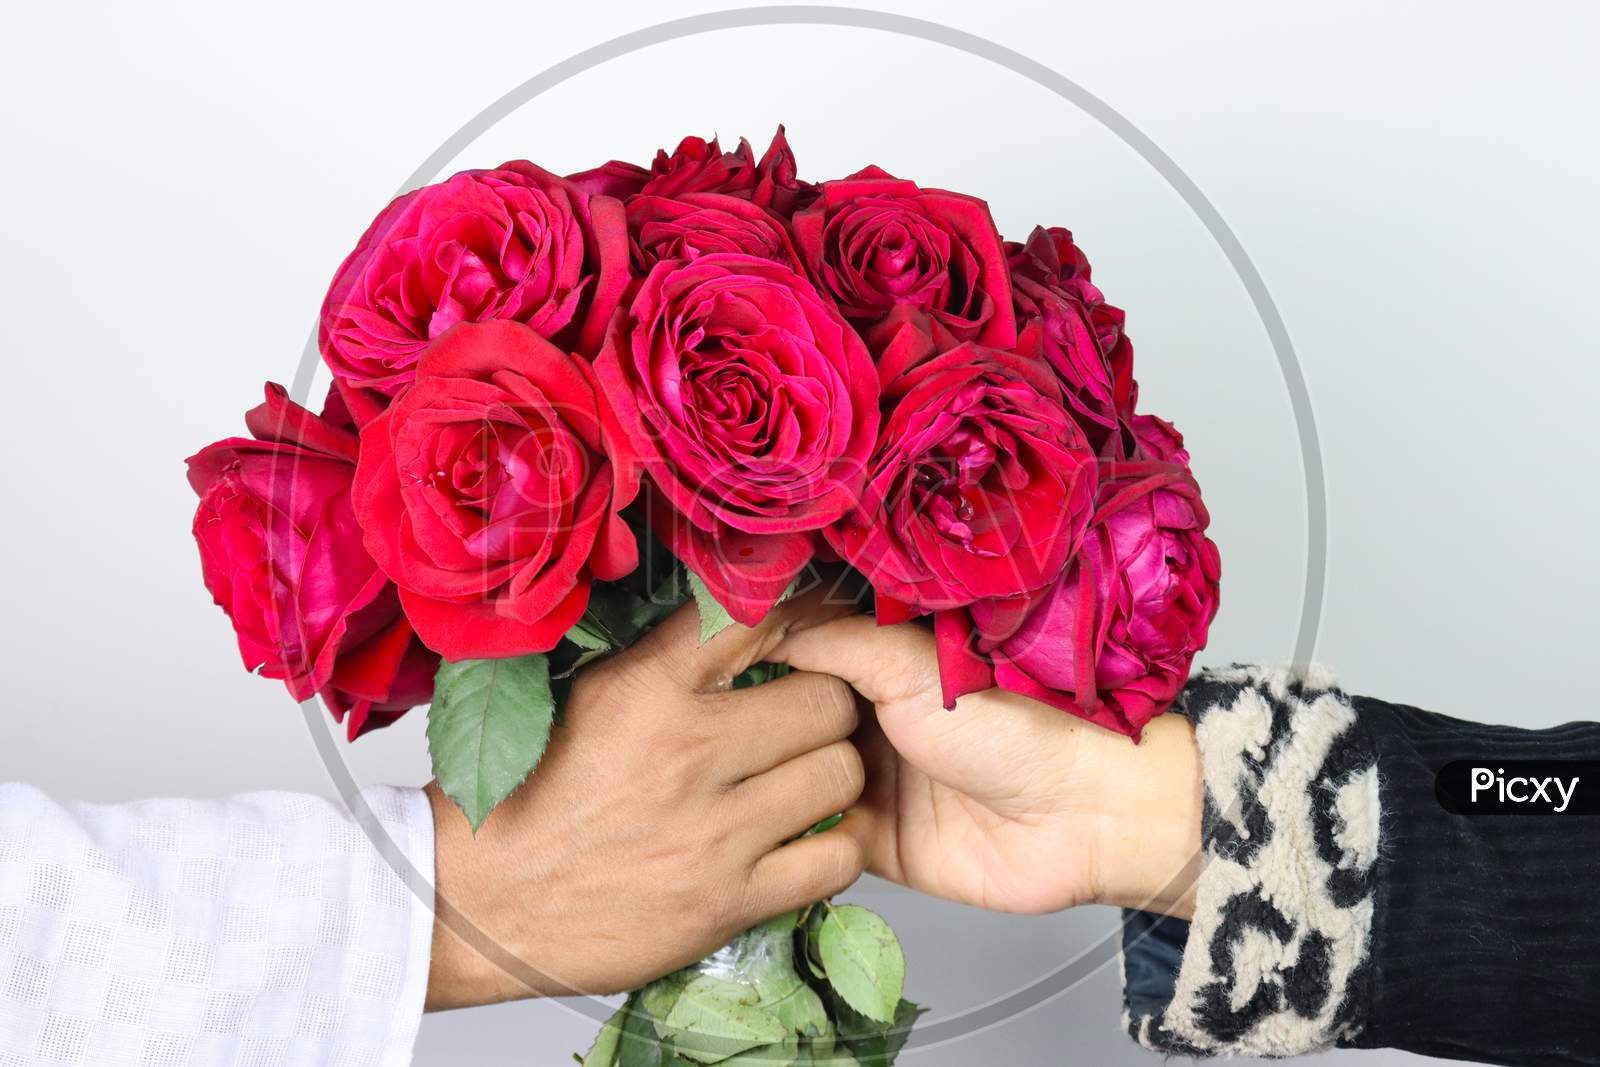 Lover Couple With Rose Bouquet